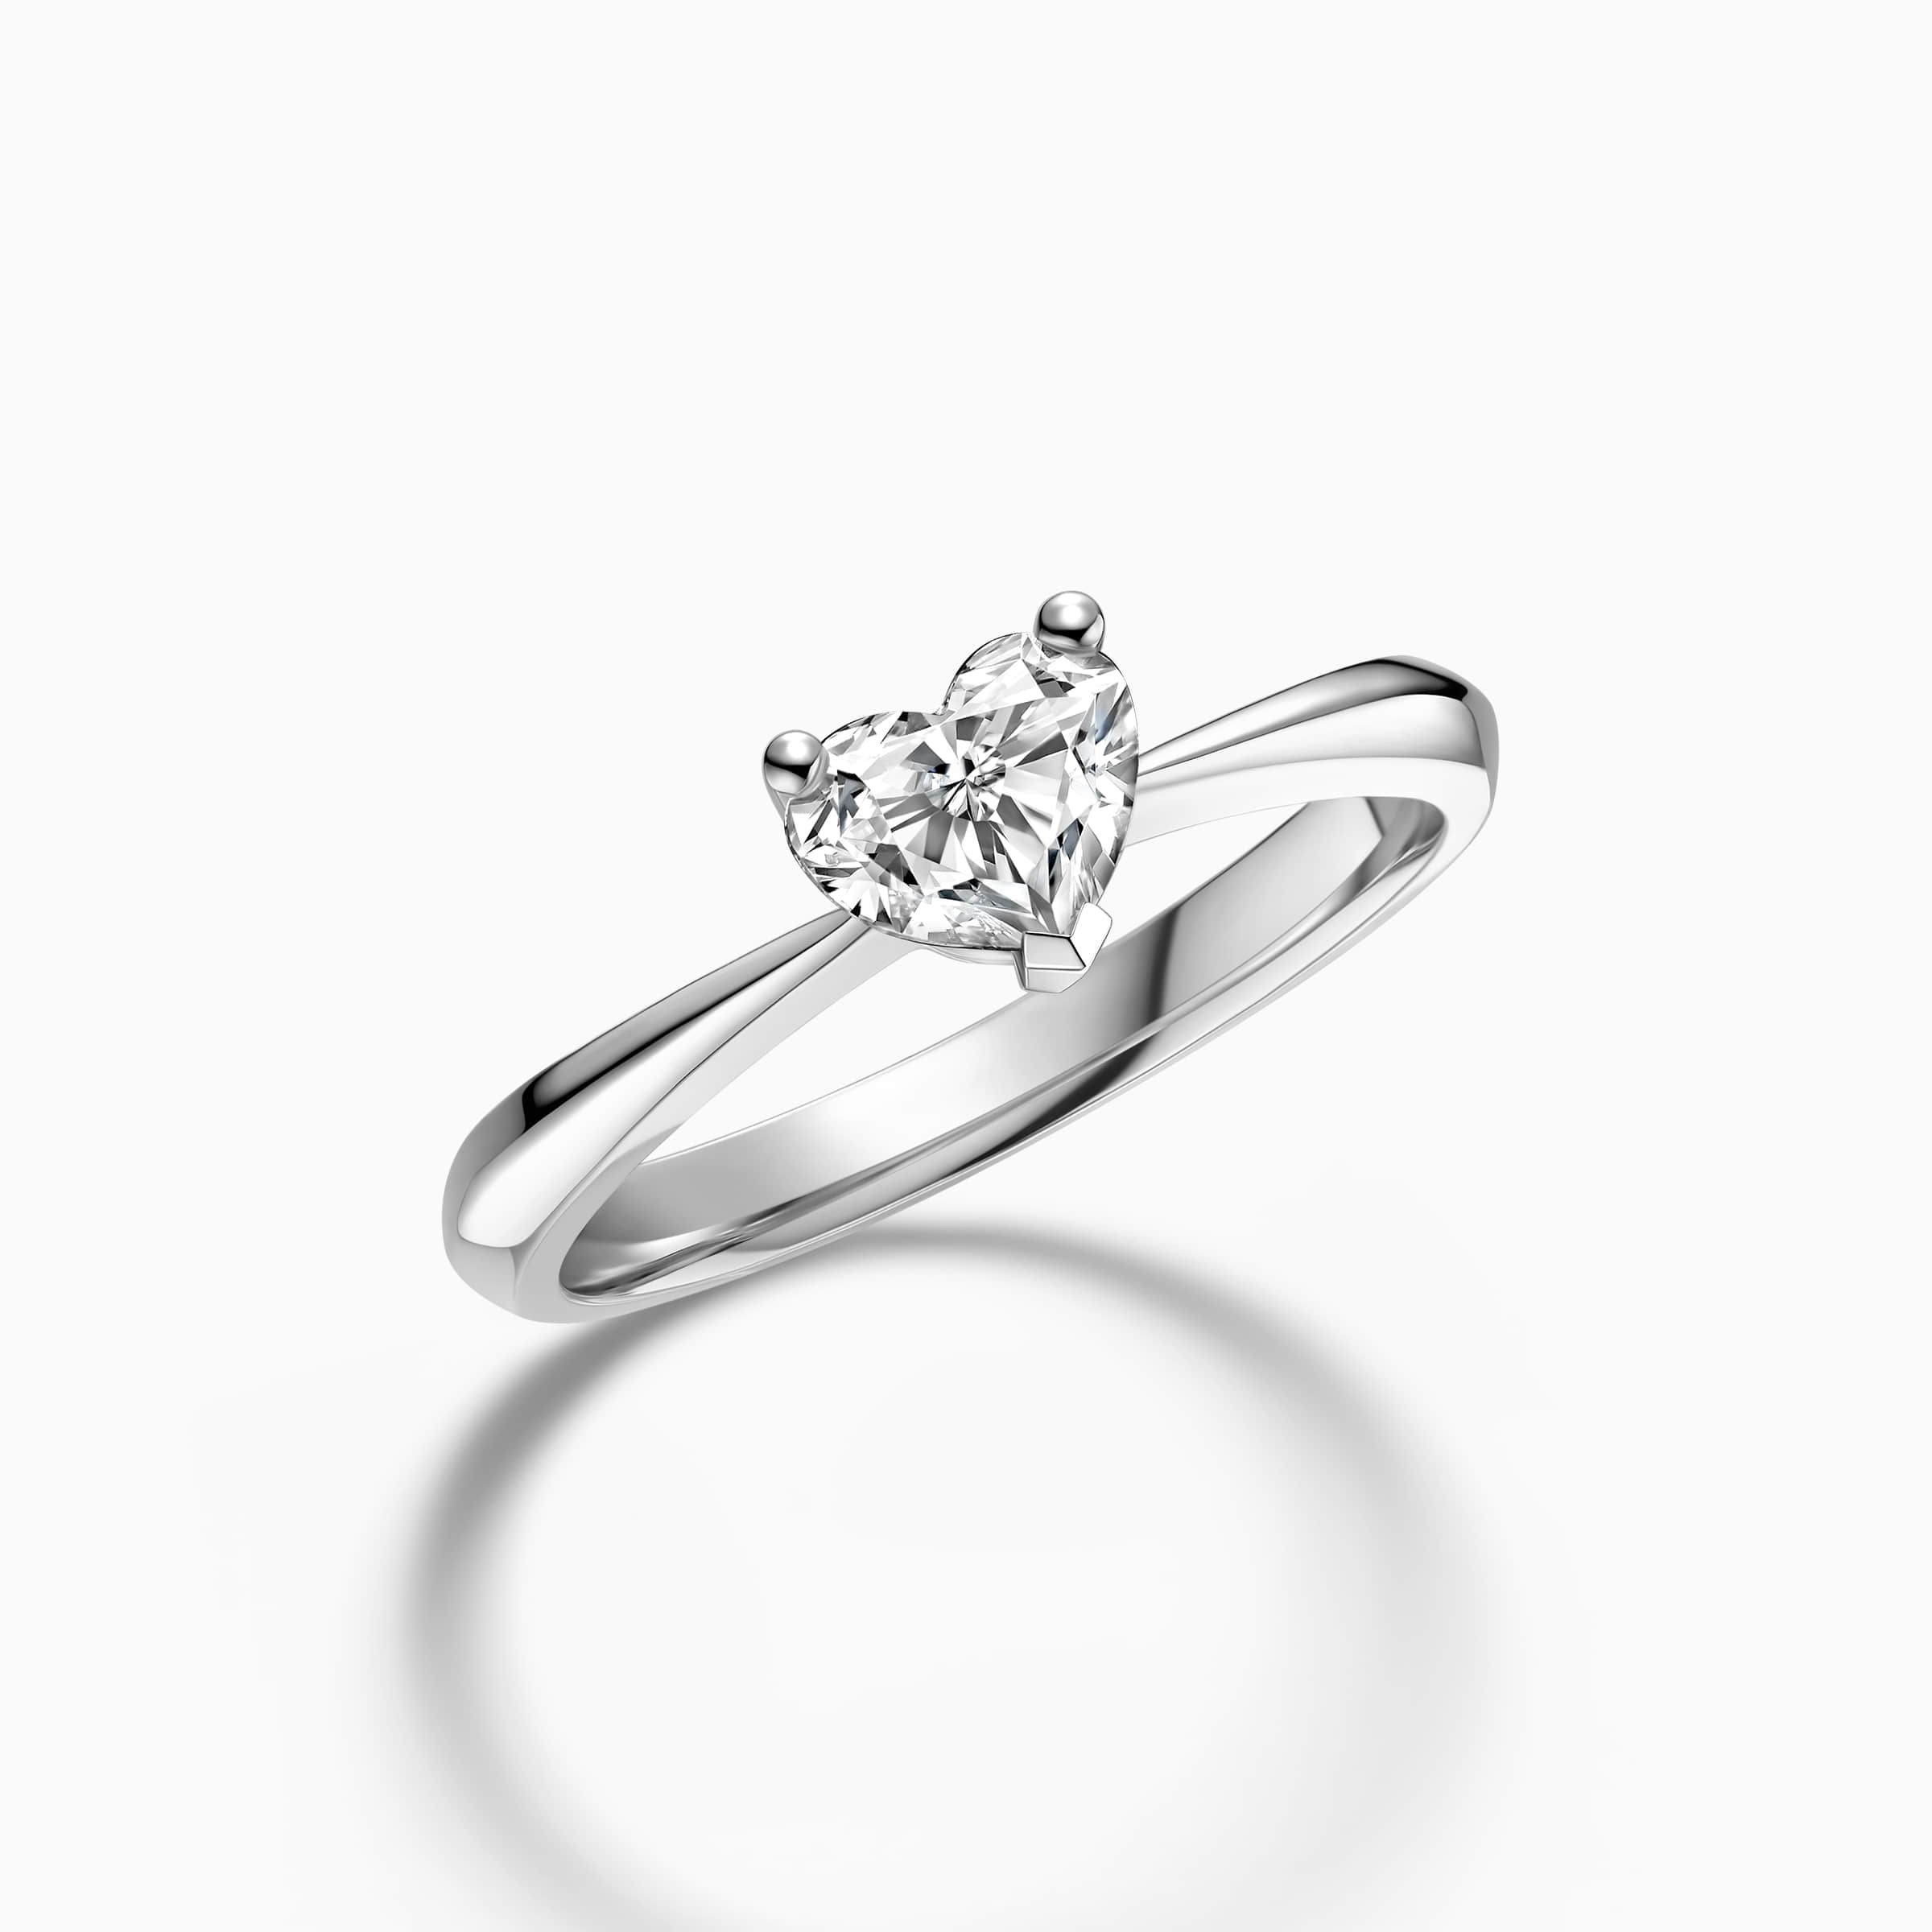 darry ring heart shaped solitaire diamond engagement ring angle view